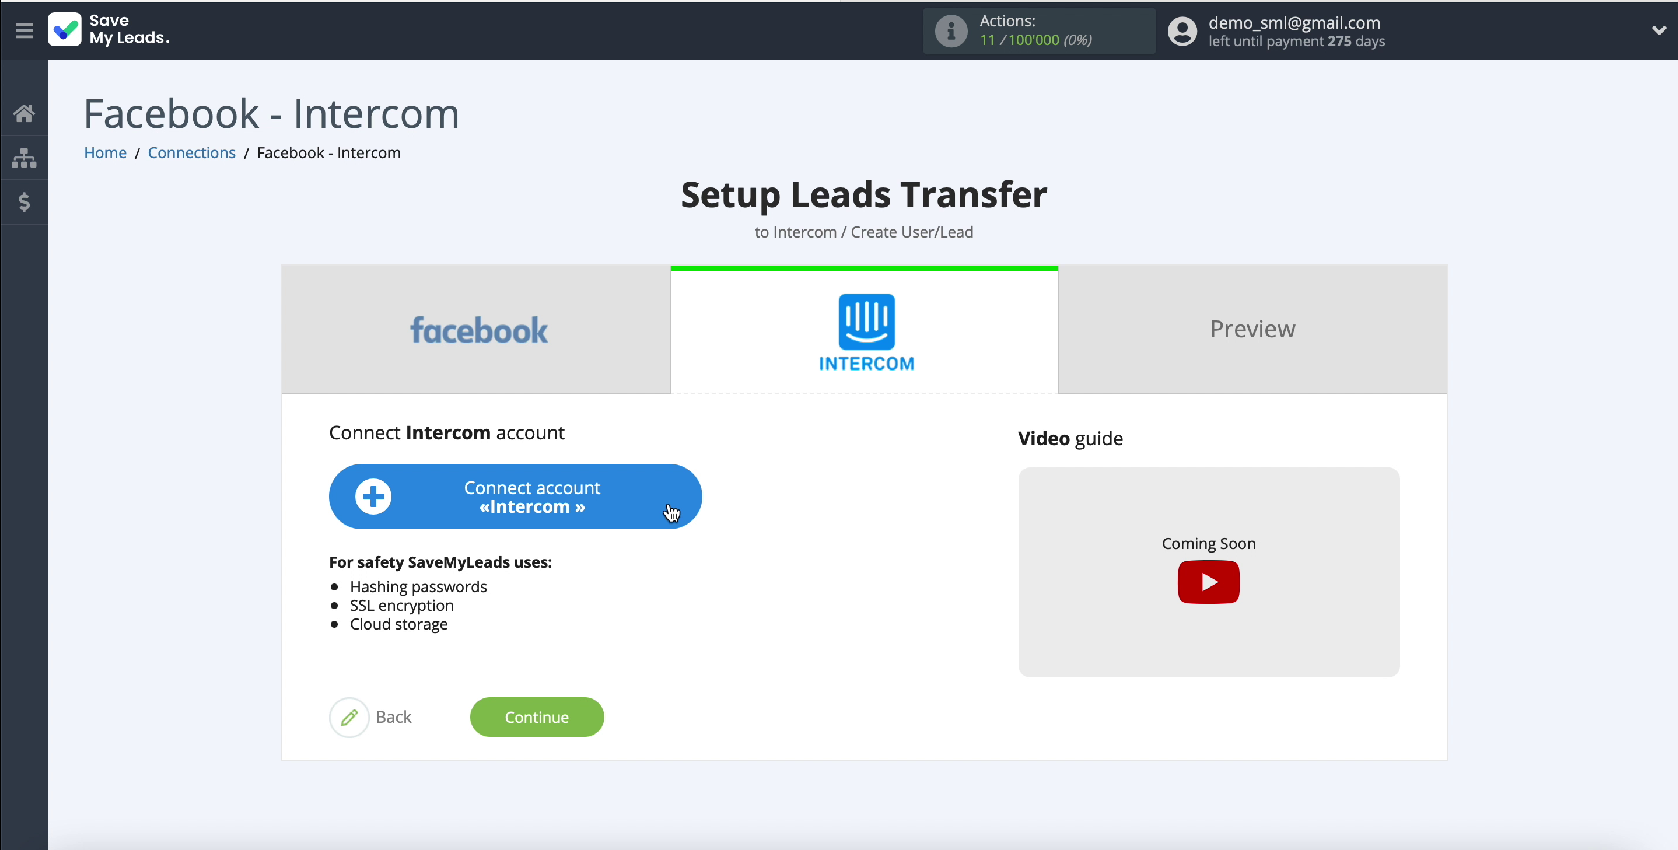 How to Create Intercom Leads from New Facebook Leads | Connect your Intercom account to SaveMyLeads